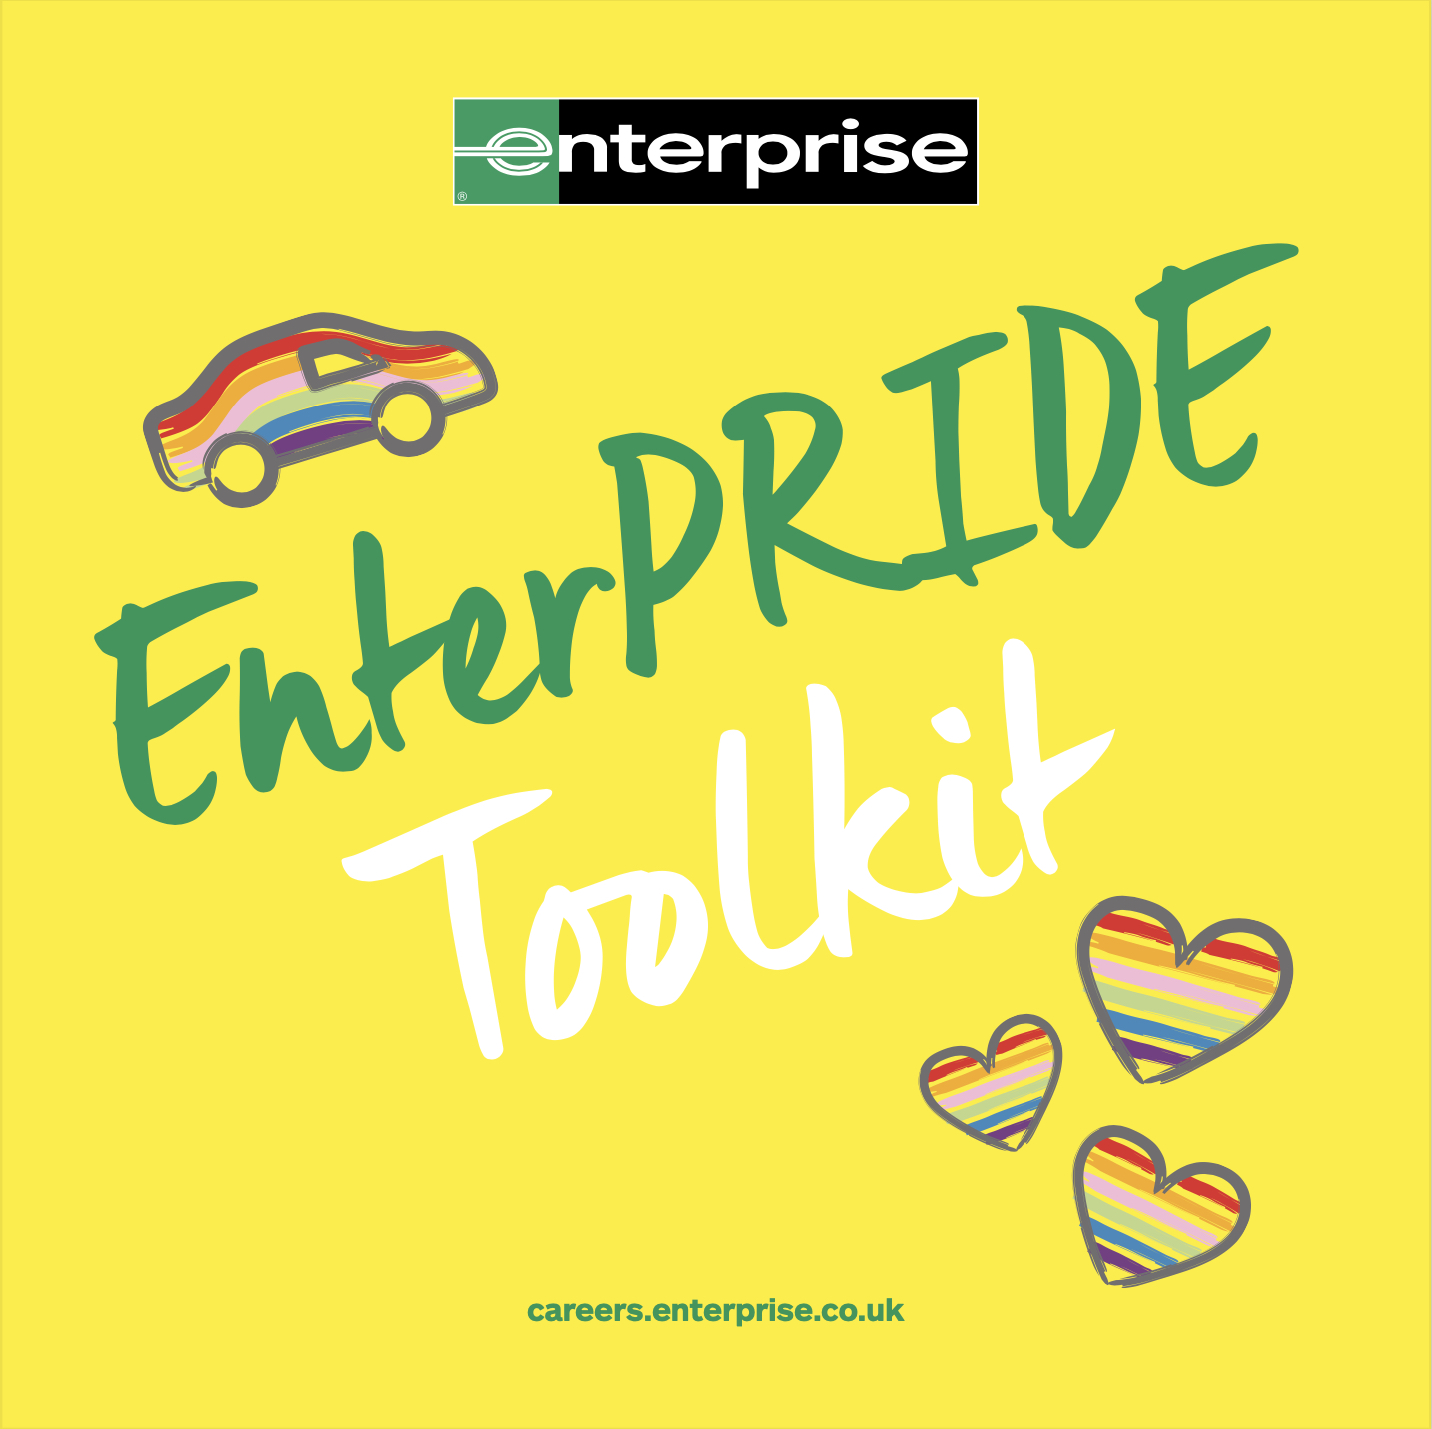 Our toolkit supported teams and managers in having better conversations during LGBTQ+ history month